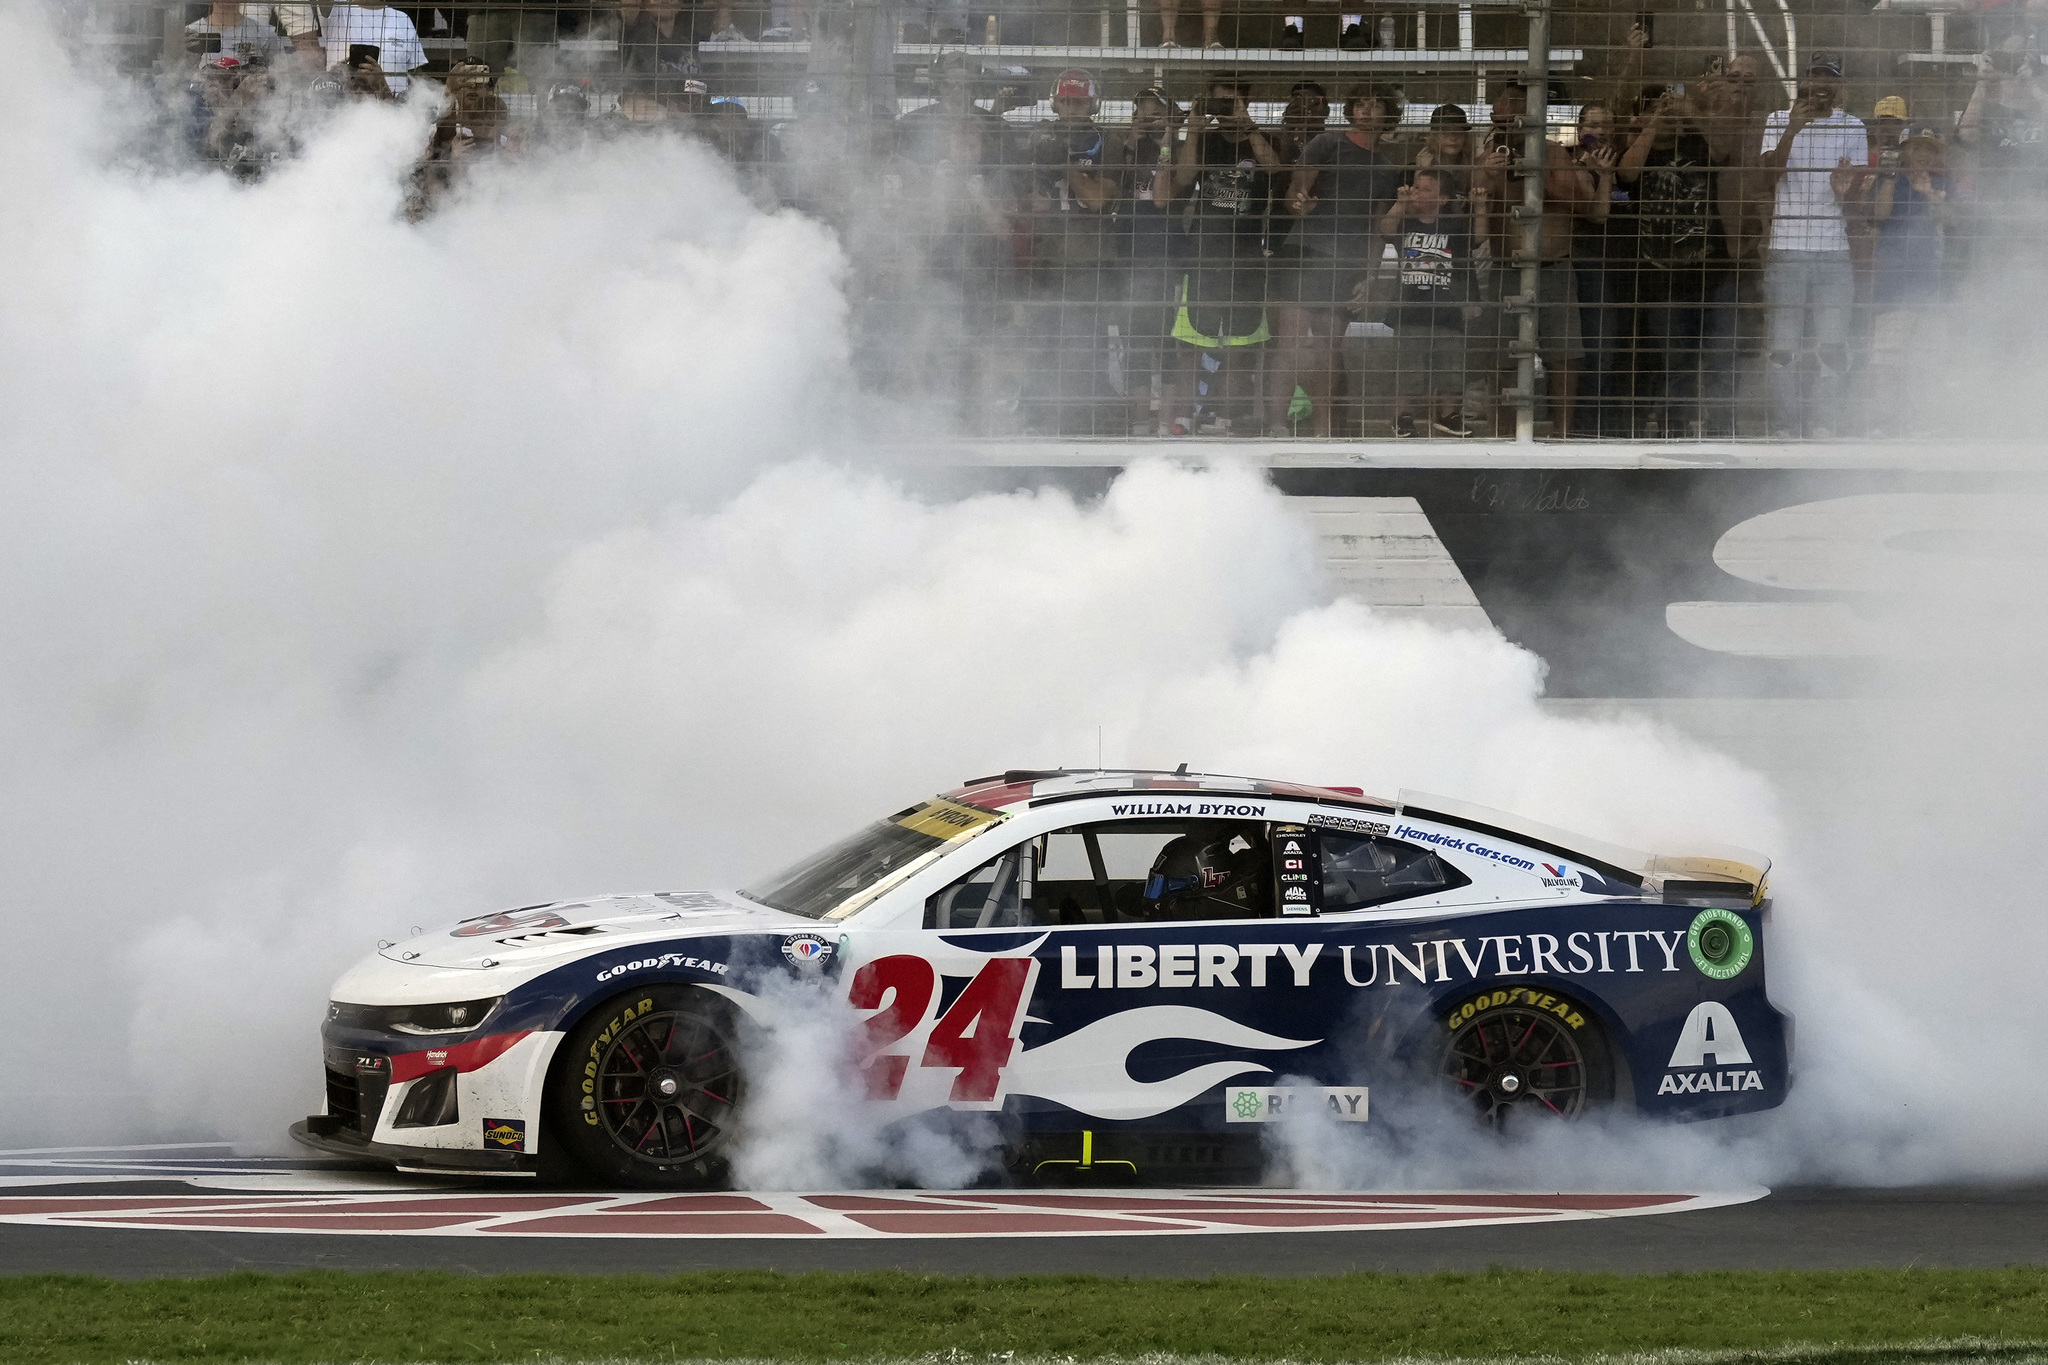 William Byron (24) burns his tires after winning the NASCAR Cup Series auto race at Texas Motor Speedway in Fort Worth, Texas, Sunday, Sept. 24, 2023. (AP Photo/LM Otero)